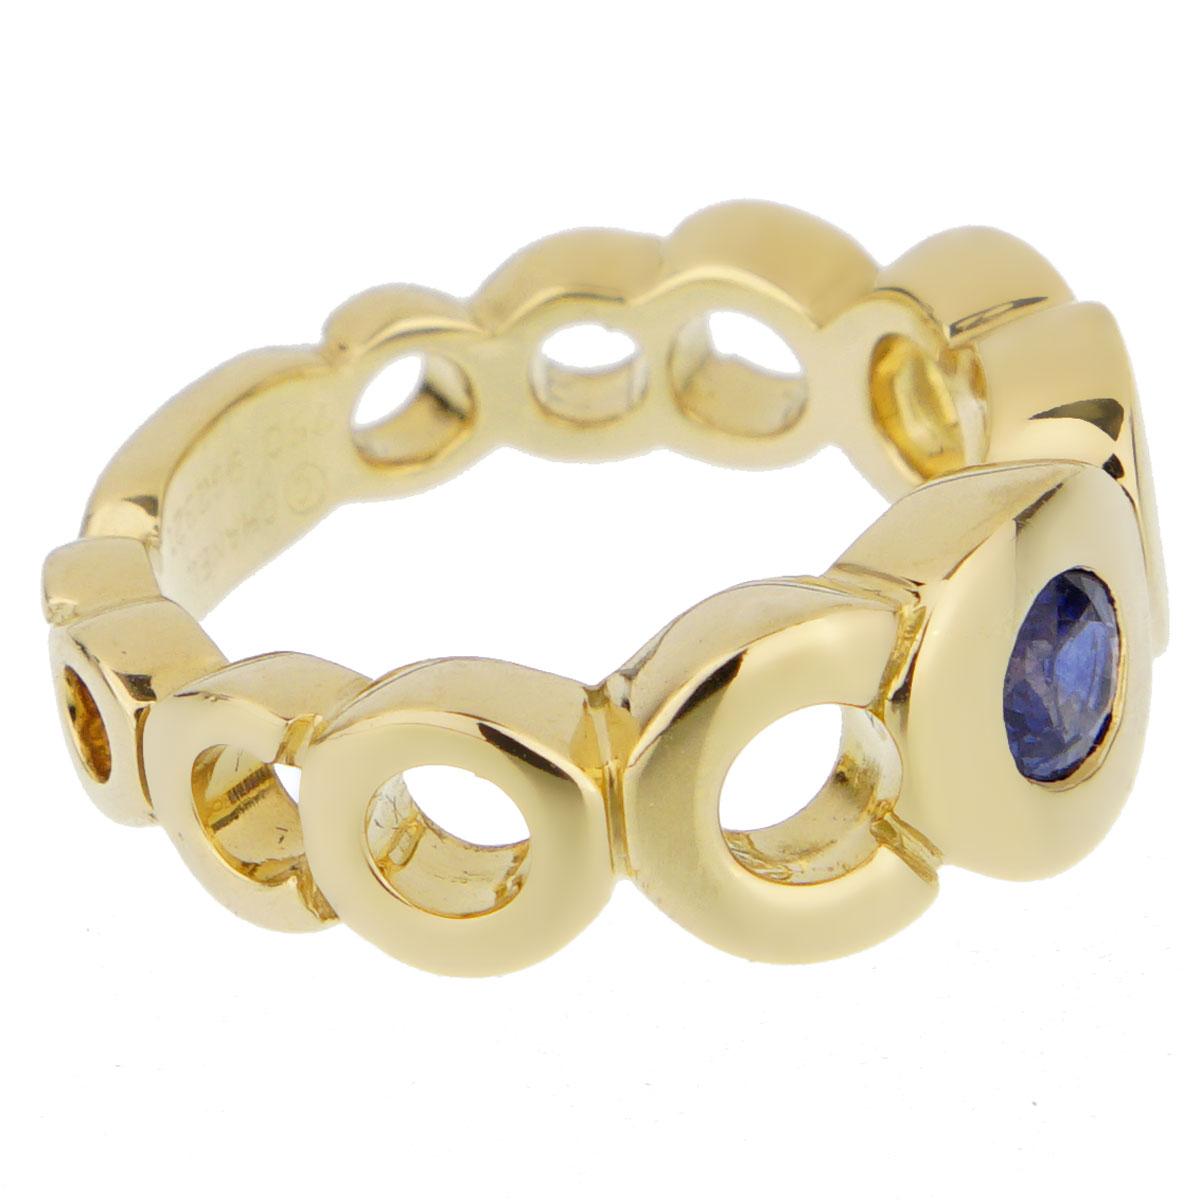 A fabulous Chanel openwork Coco ring set with a .30ct appx sapphire in shimmering 18k yellow gold. The ring measures a size 5 and can be resized.